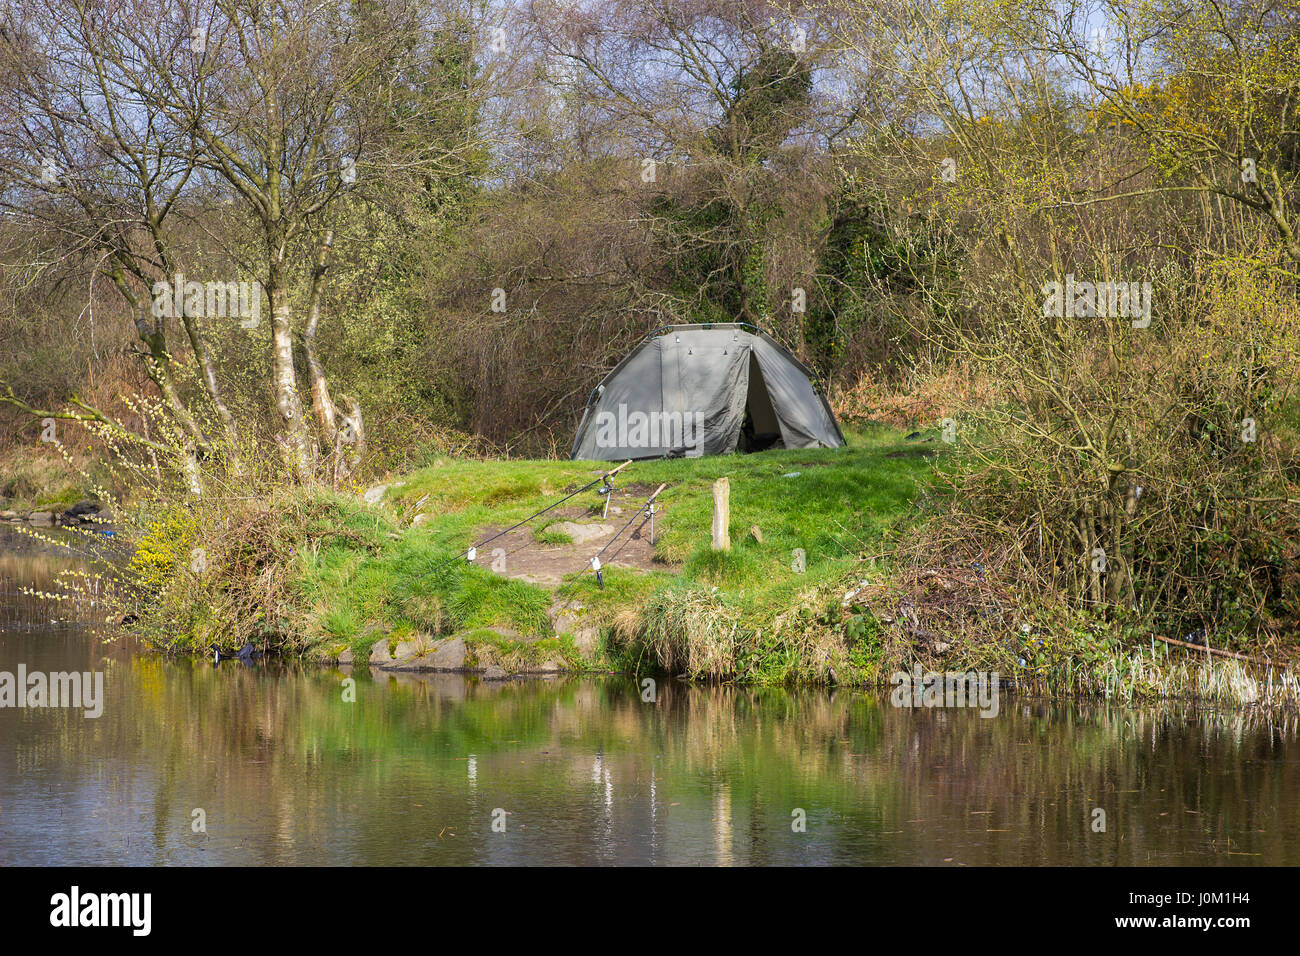 A two man tent pitched on a piece of ground beside the lake at the old lead mines workings in Conlig, County Down in N Ireland on an early spring day. Stock Photo